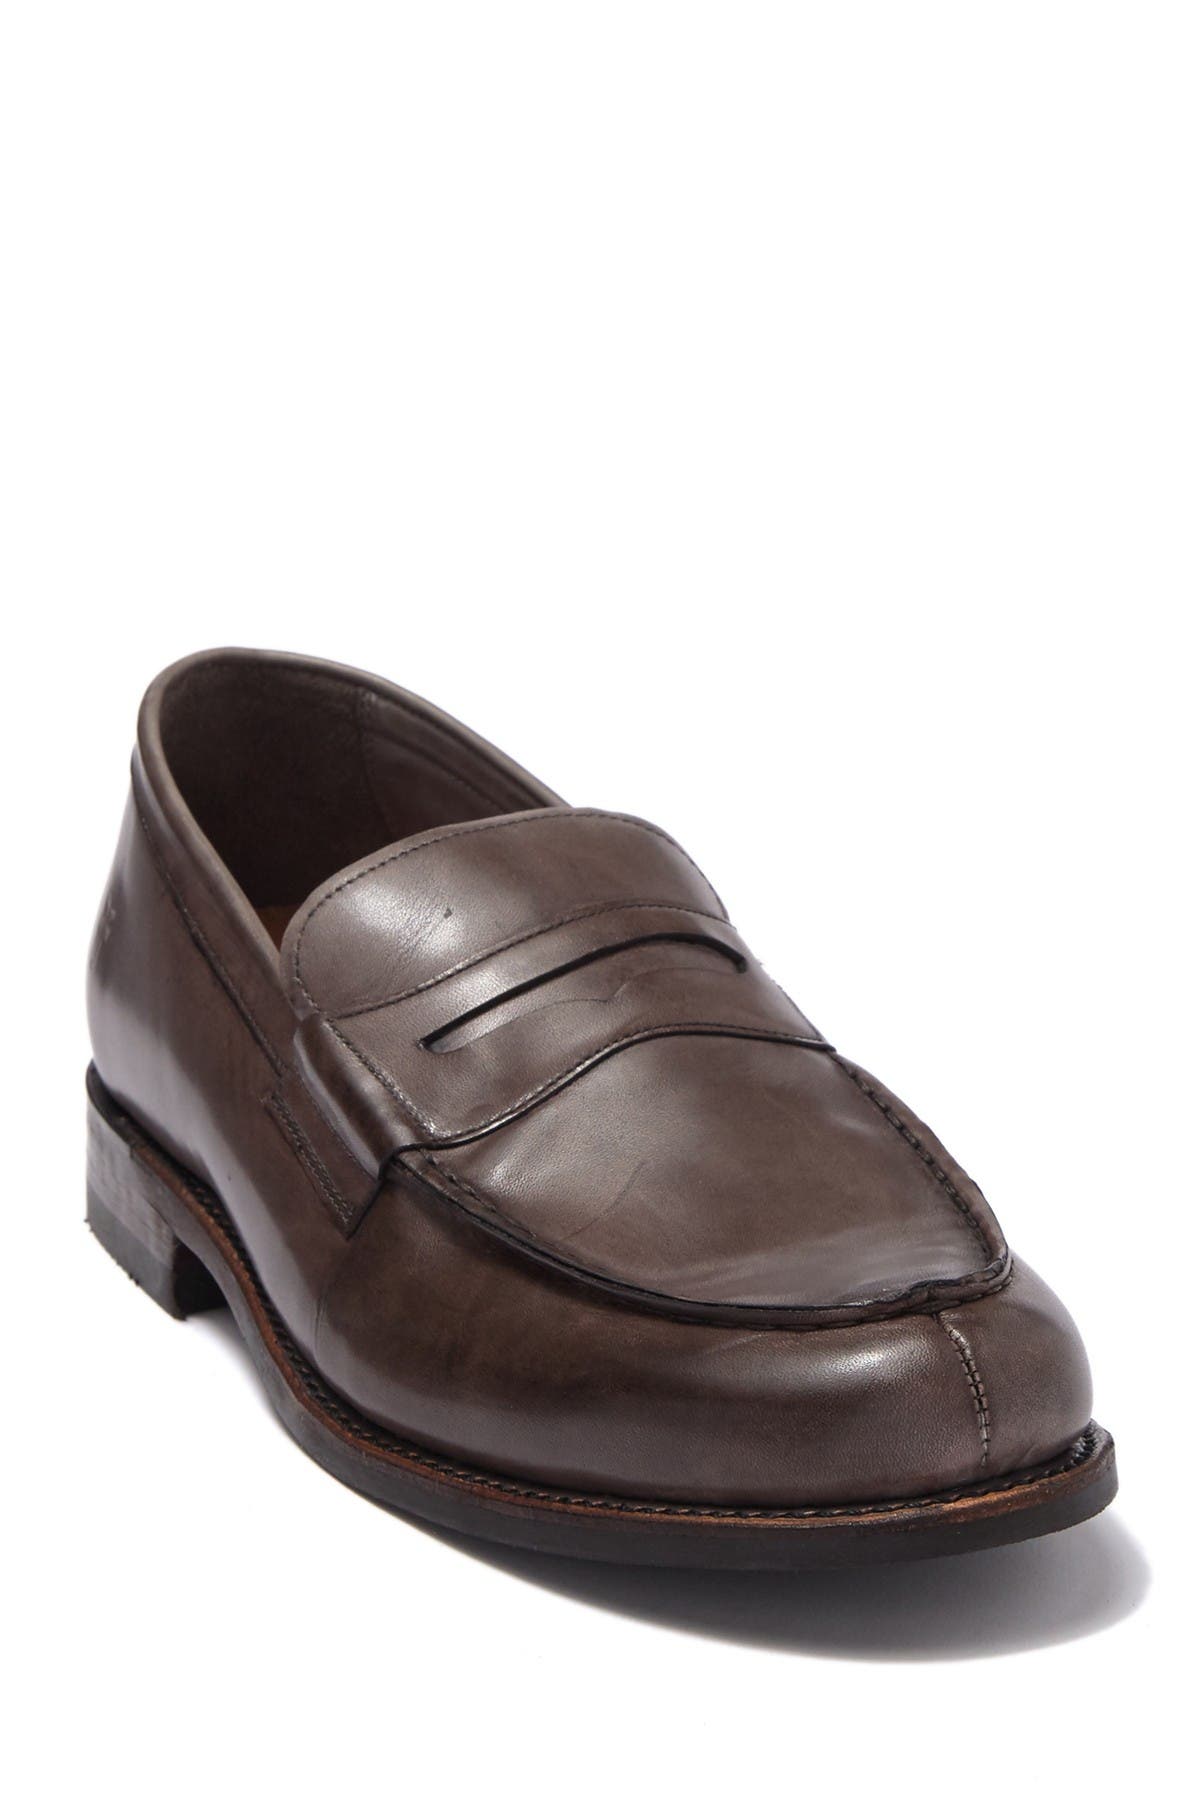 nordstrom penny loafers